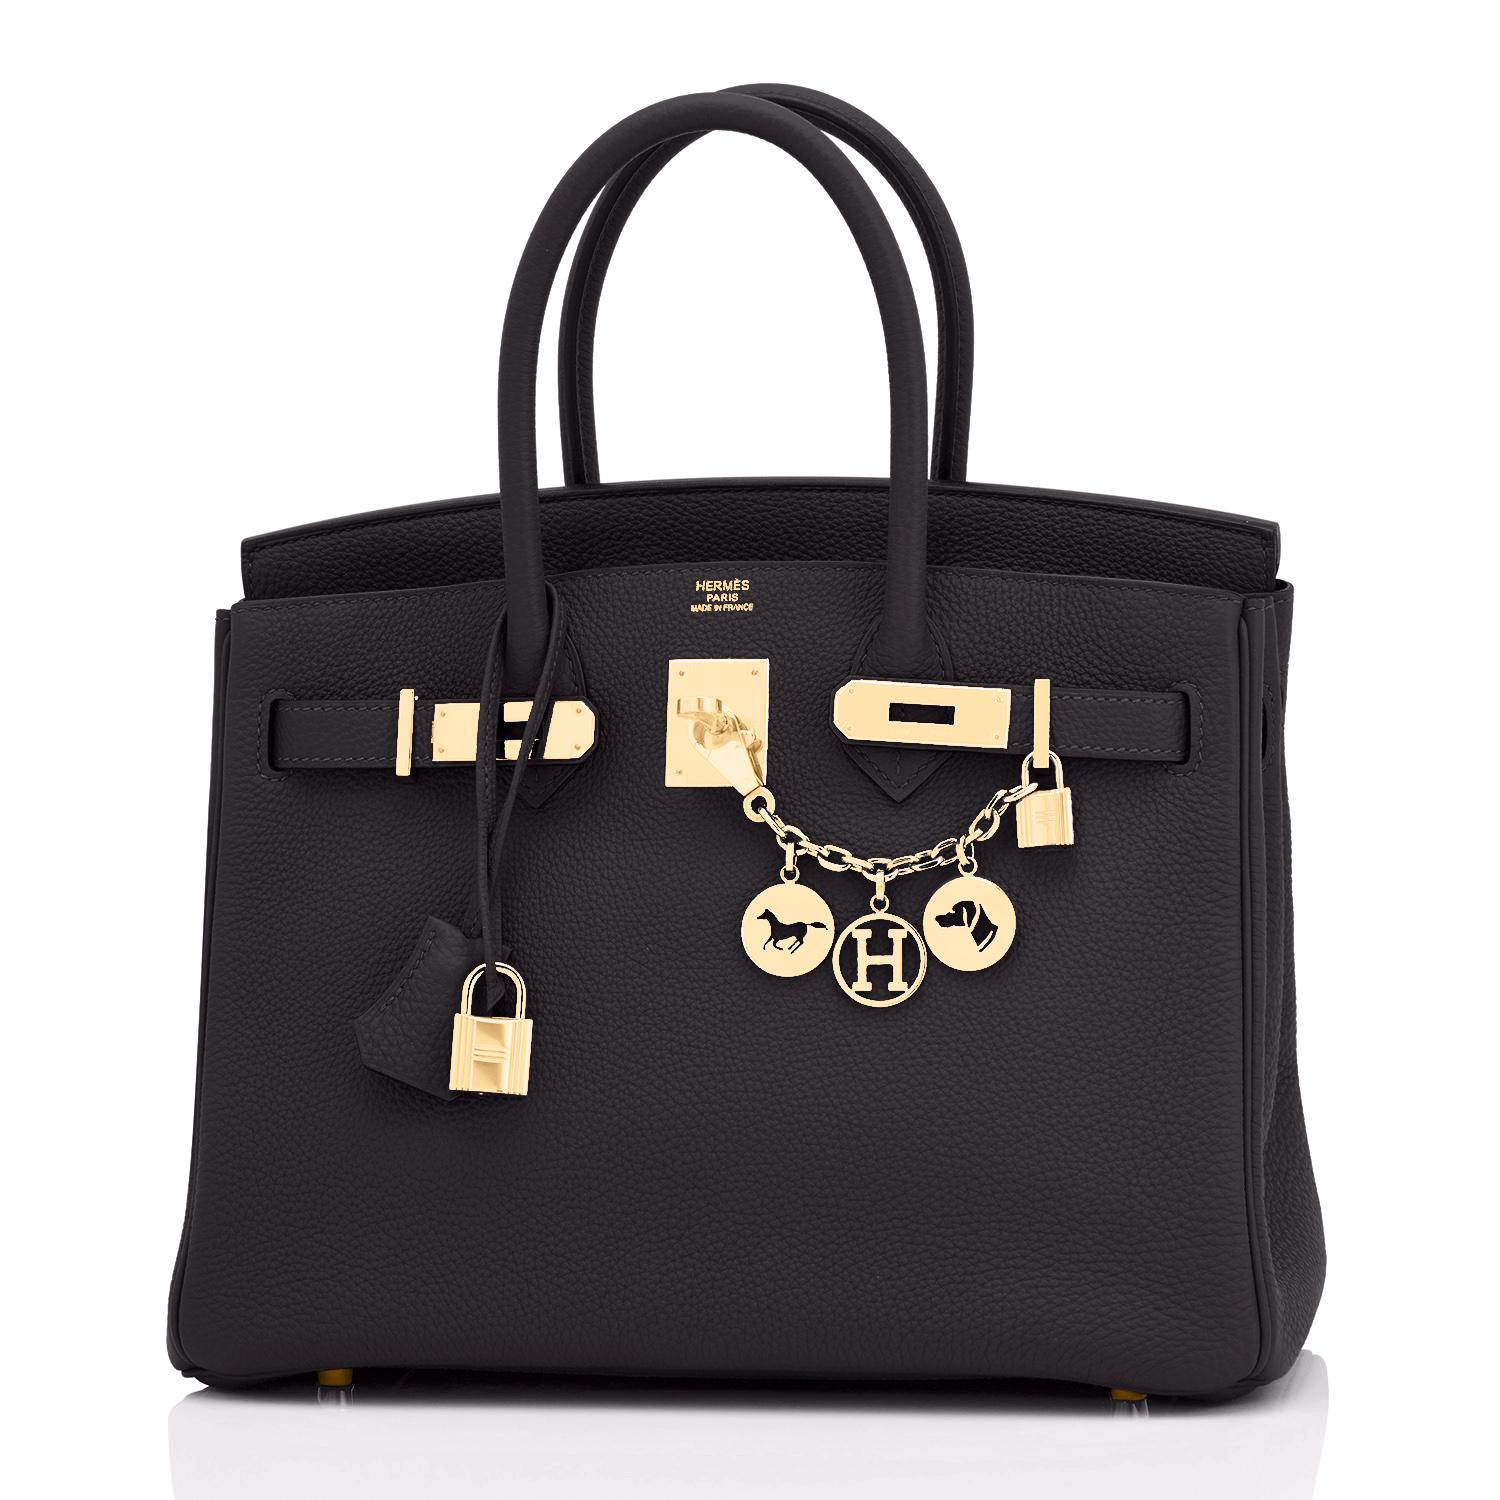 Hermes Birkin 30cm Black Togo Gold Hardware Bag Z Stamp, 2021
Brand New in Box. Store Fresh. Pristine Condition (with plastic on hardware)
Just purchased from Hermes store; bag bears new 2021 interior Z stamp! 
Perfect gift! Comes with lock, keys,